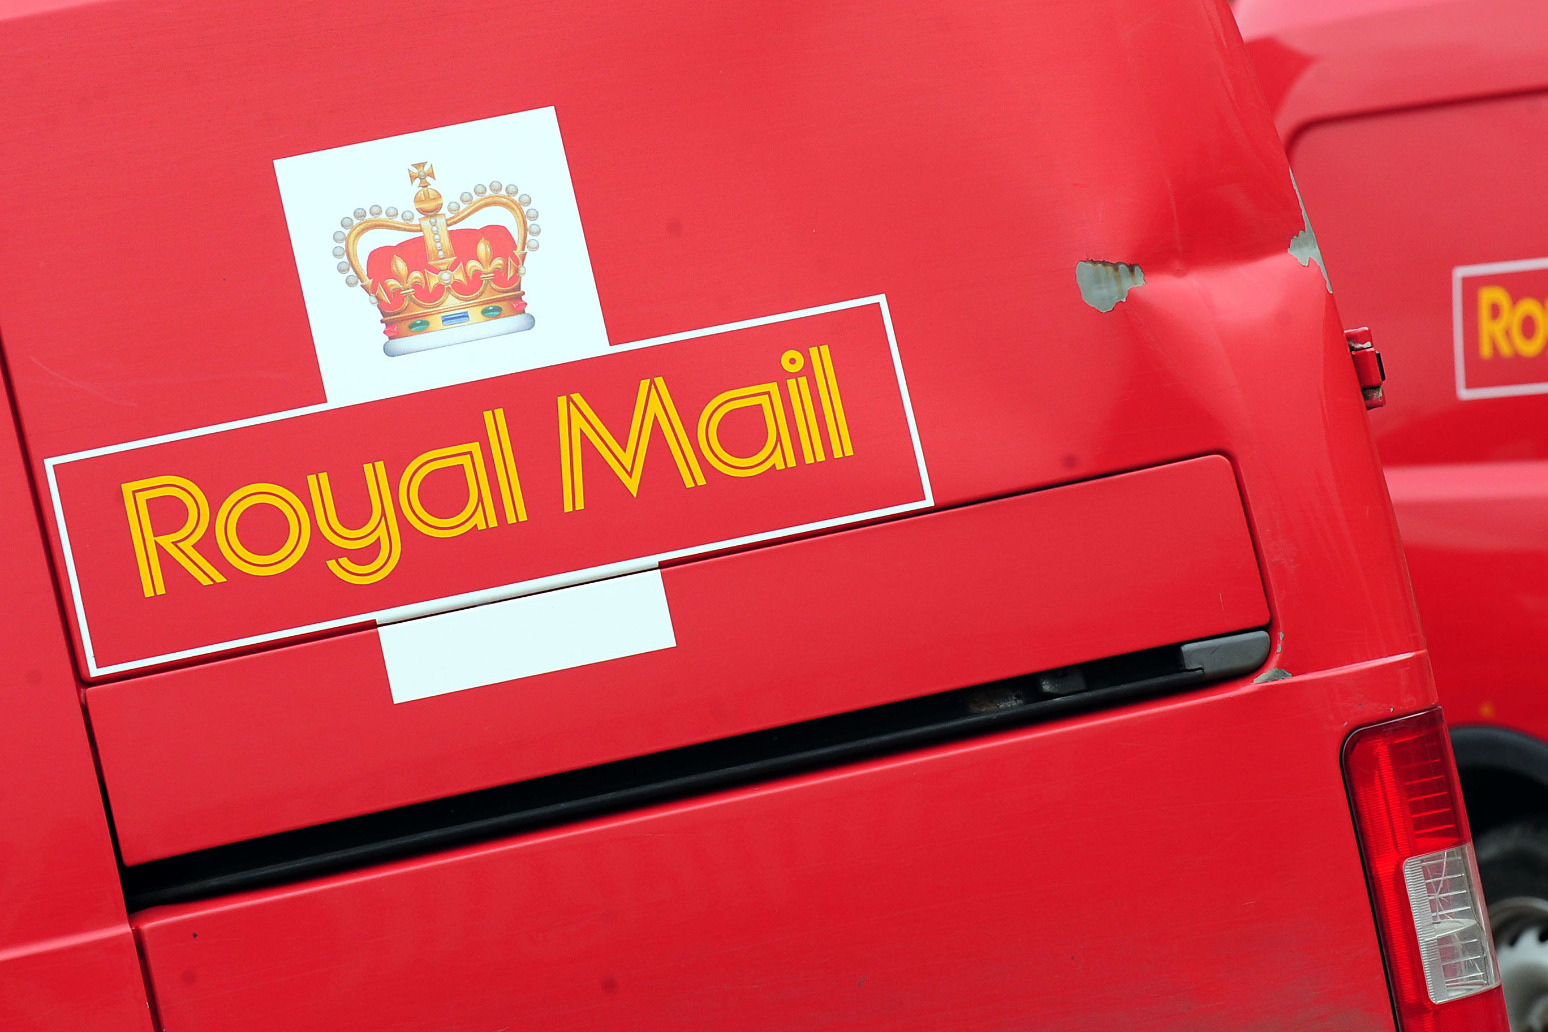 Fresh strike by Royal Mail workers over jobs and conditions 